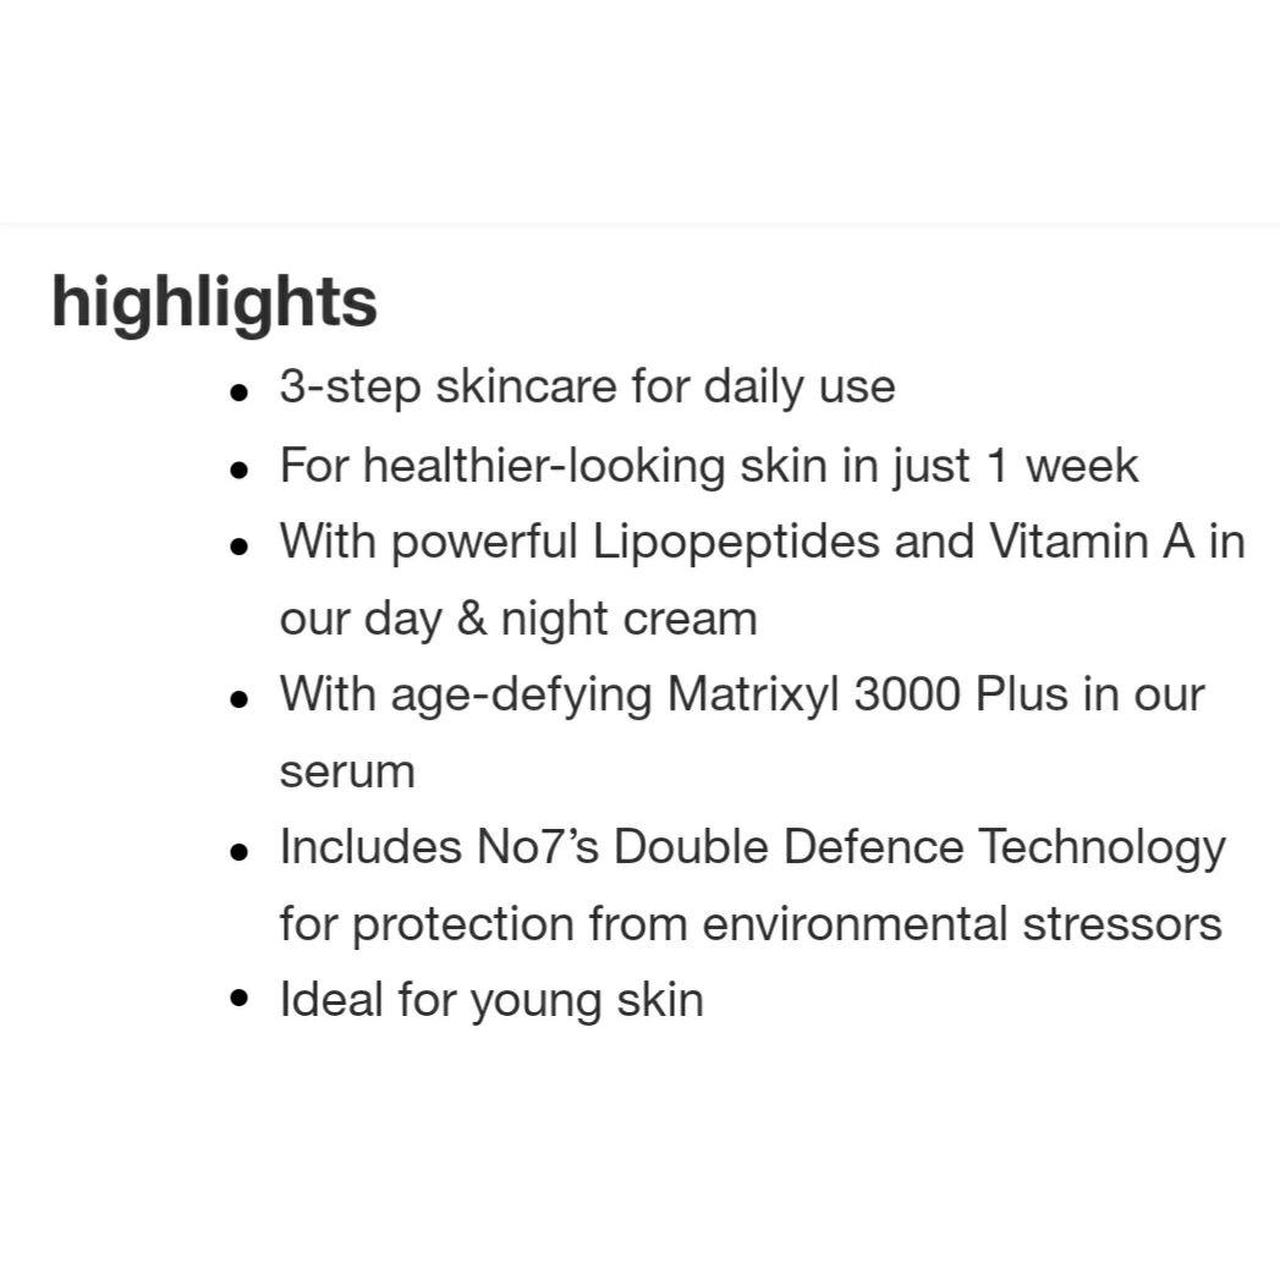 Product Image 3 - The No7 Early Defense Skincare System has